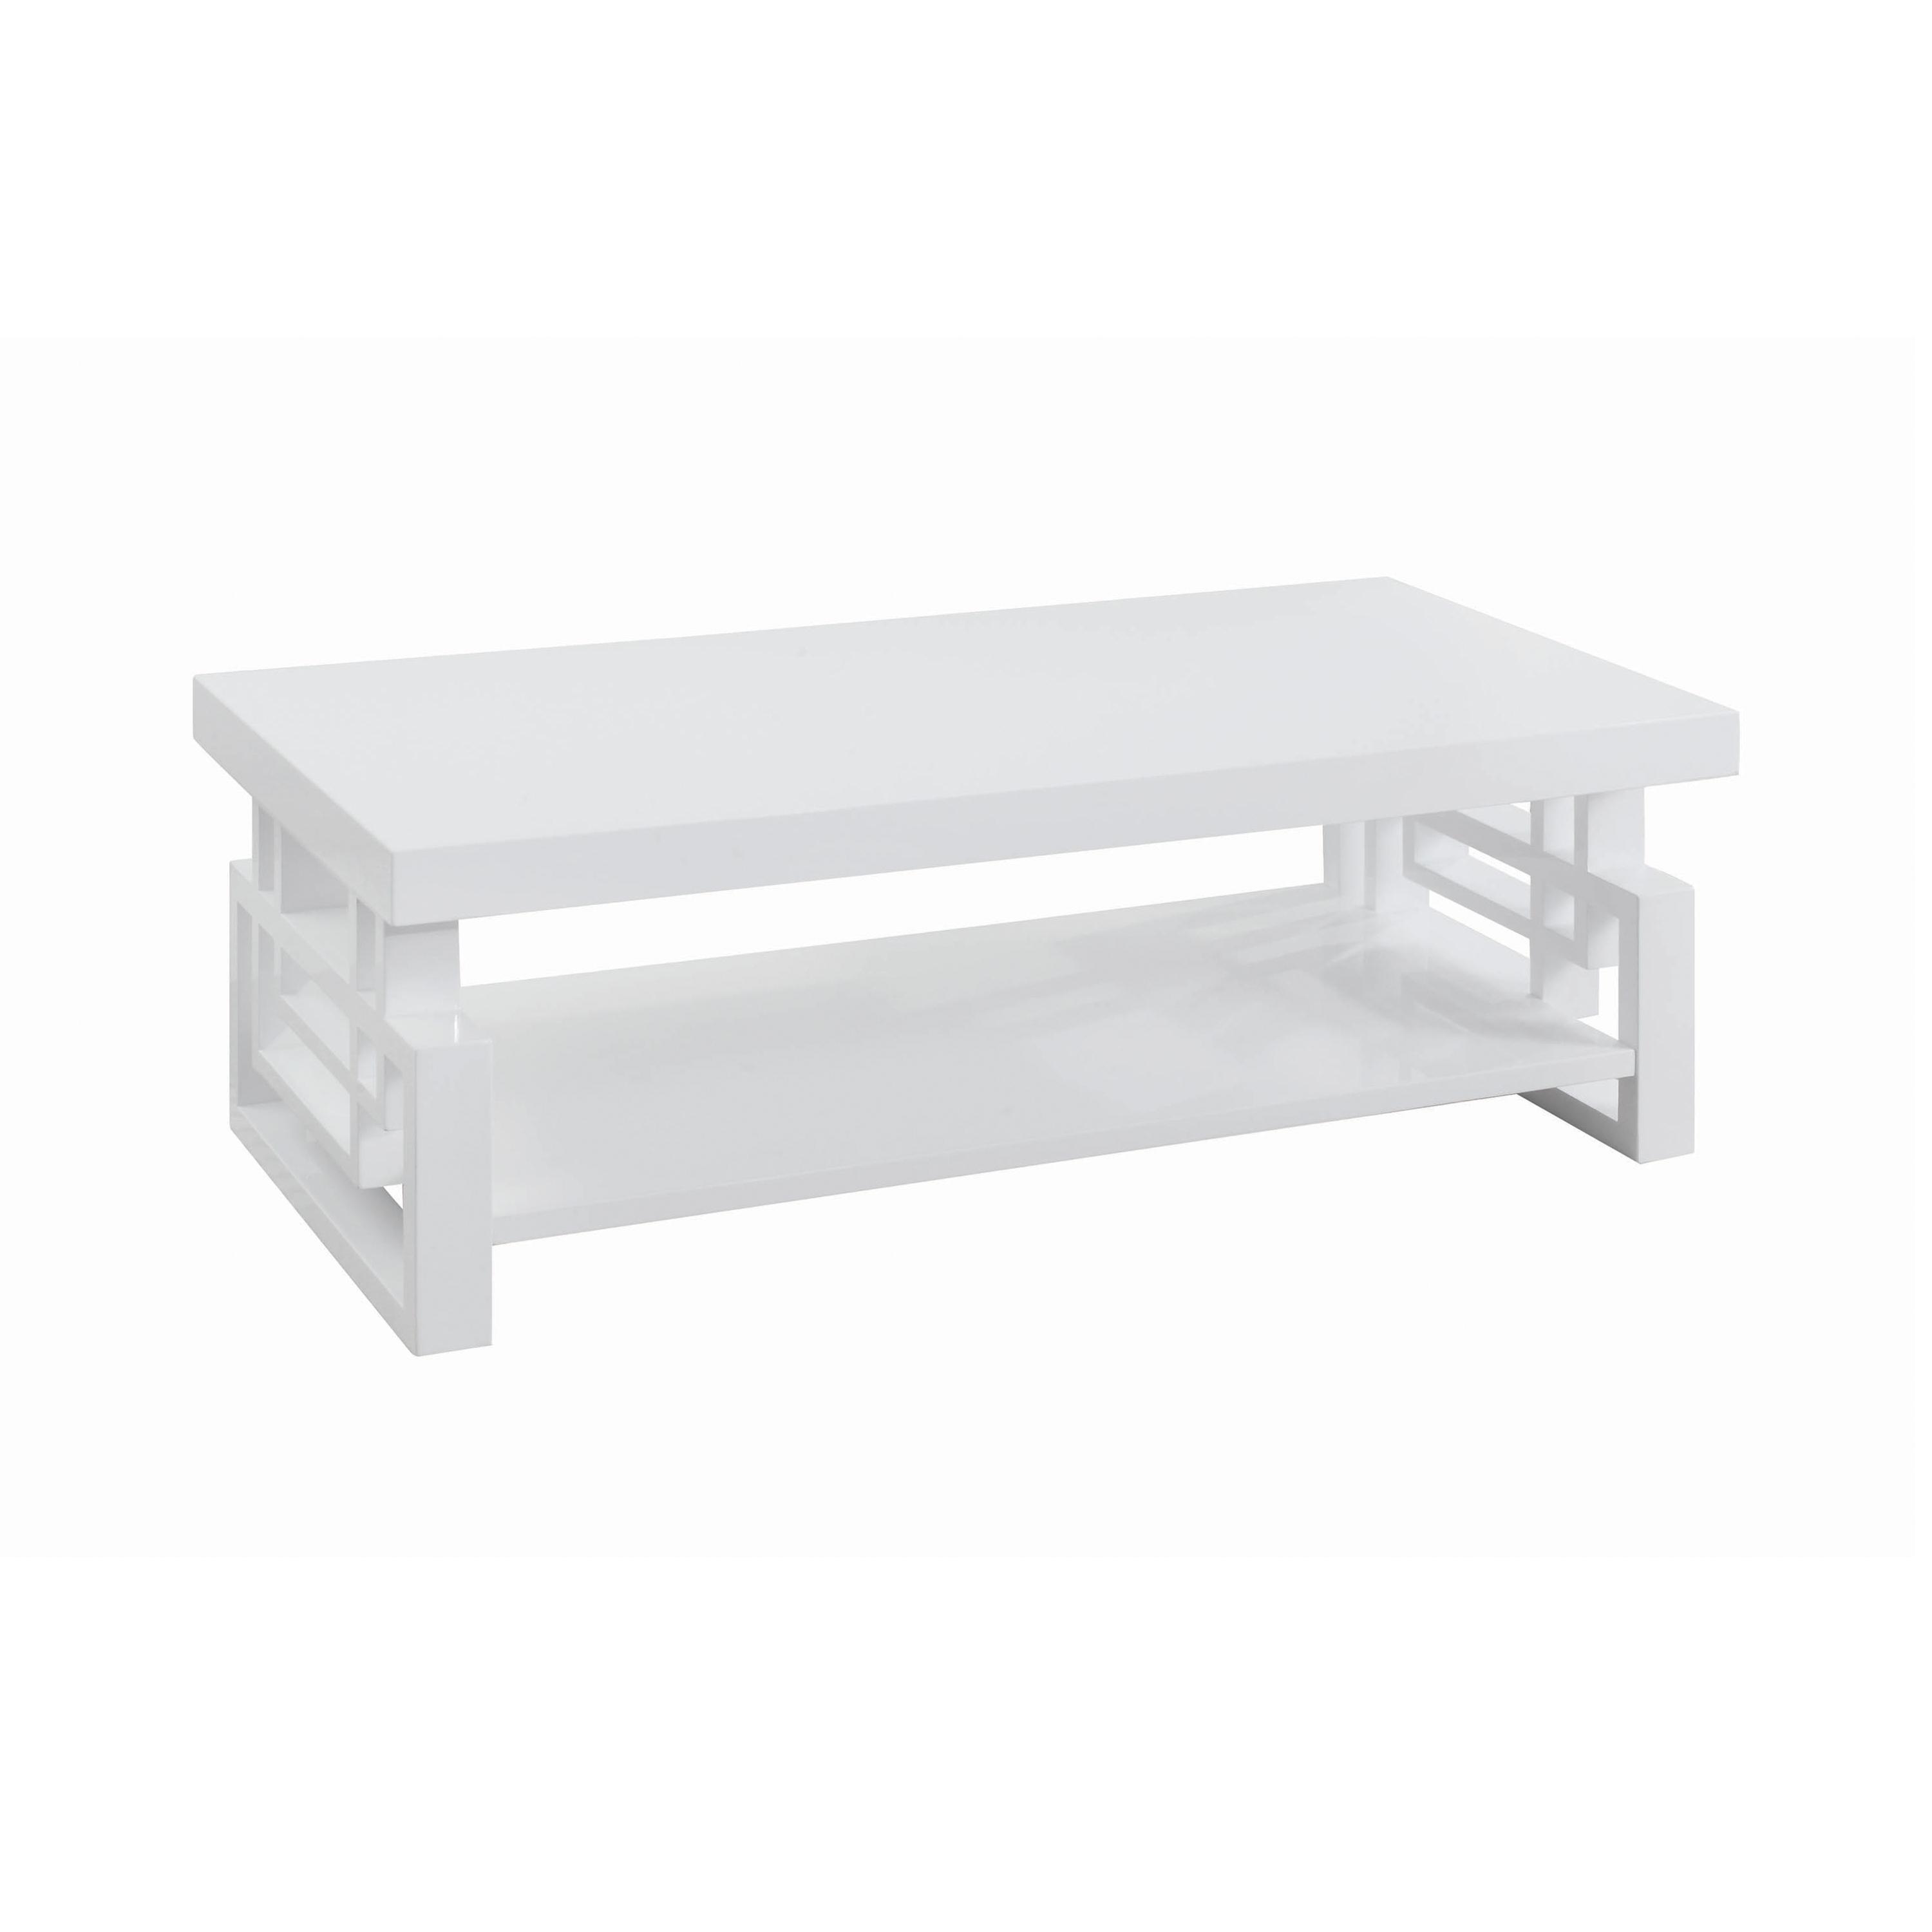 Transitional Coffee Table 705708 705708 in White 